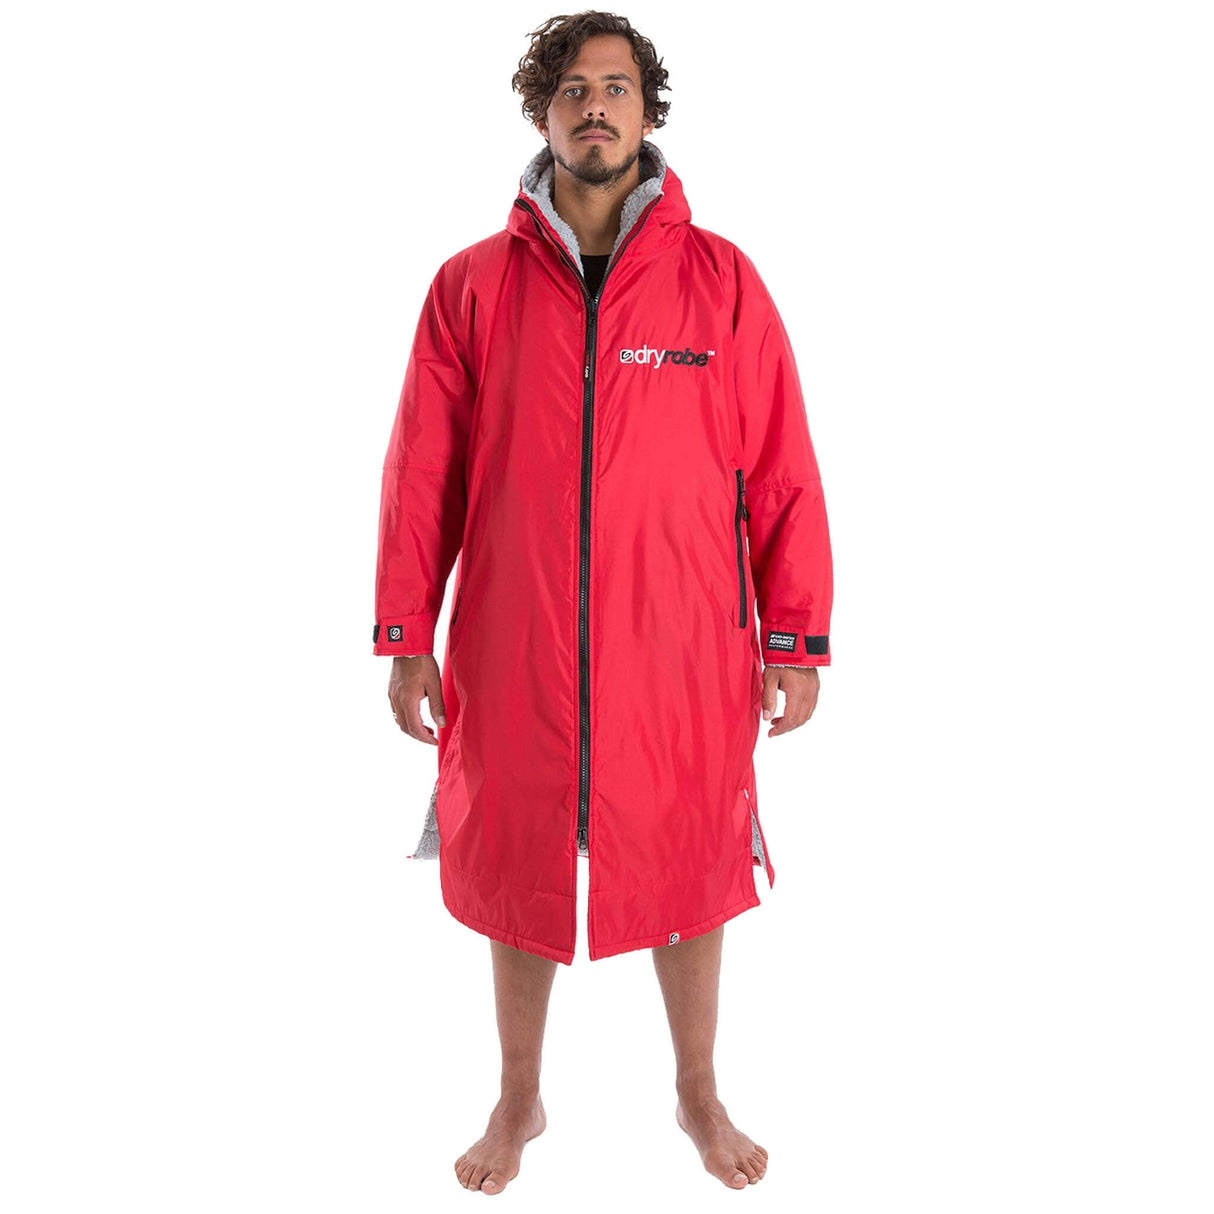 Dryrobe Red Long Sleeved Changing Robe